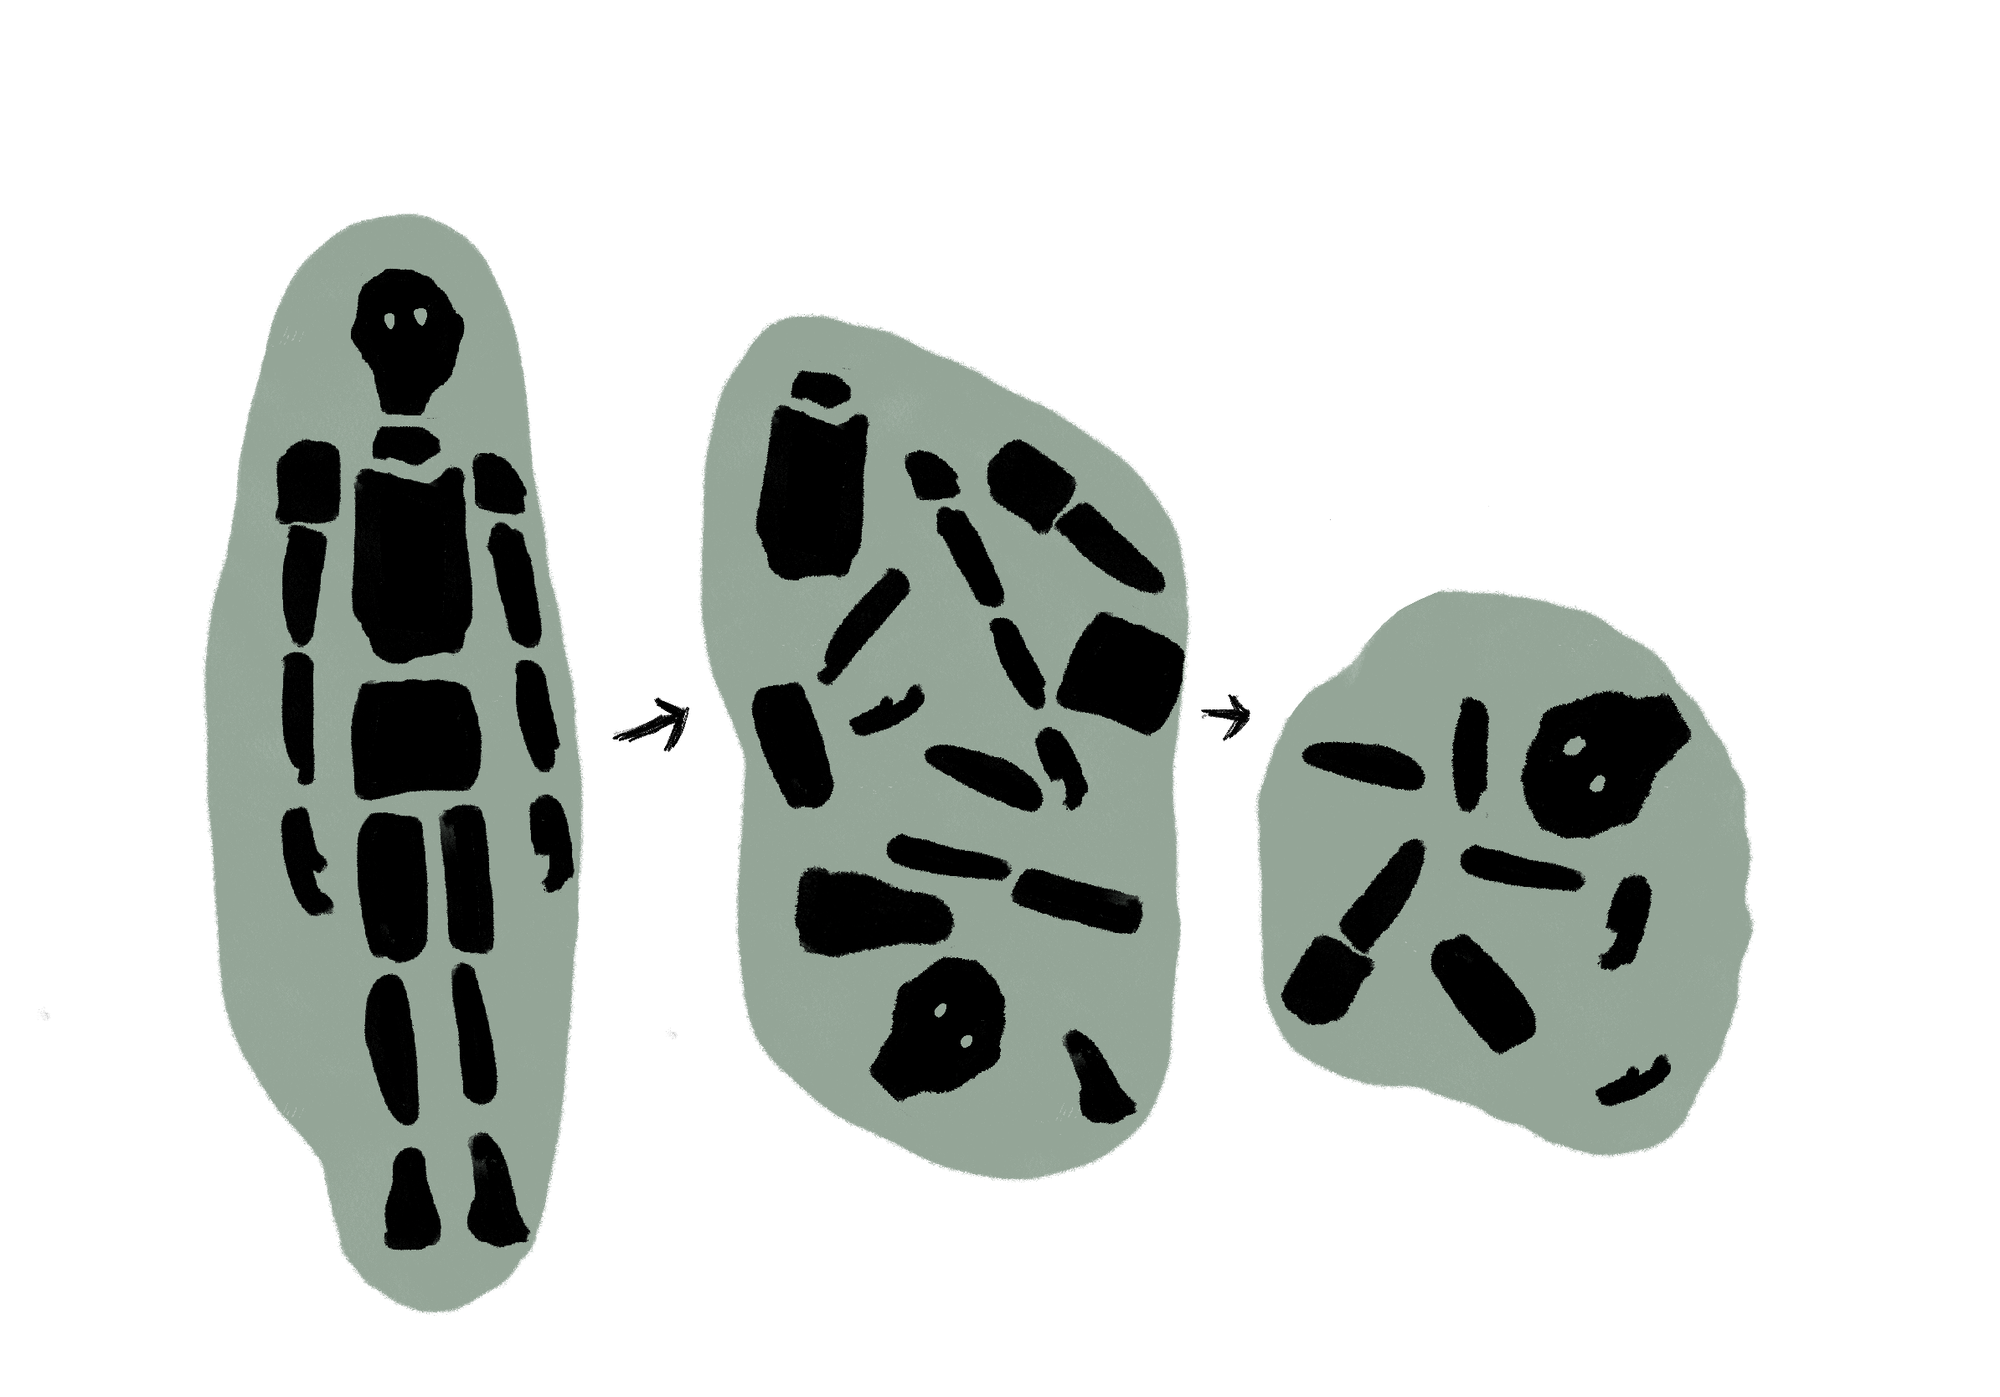 A depiction of the floating controller that changes as you enter different regions. Different body parts float around, and some of the body parts disappear as you move to another area.